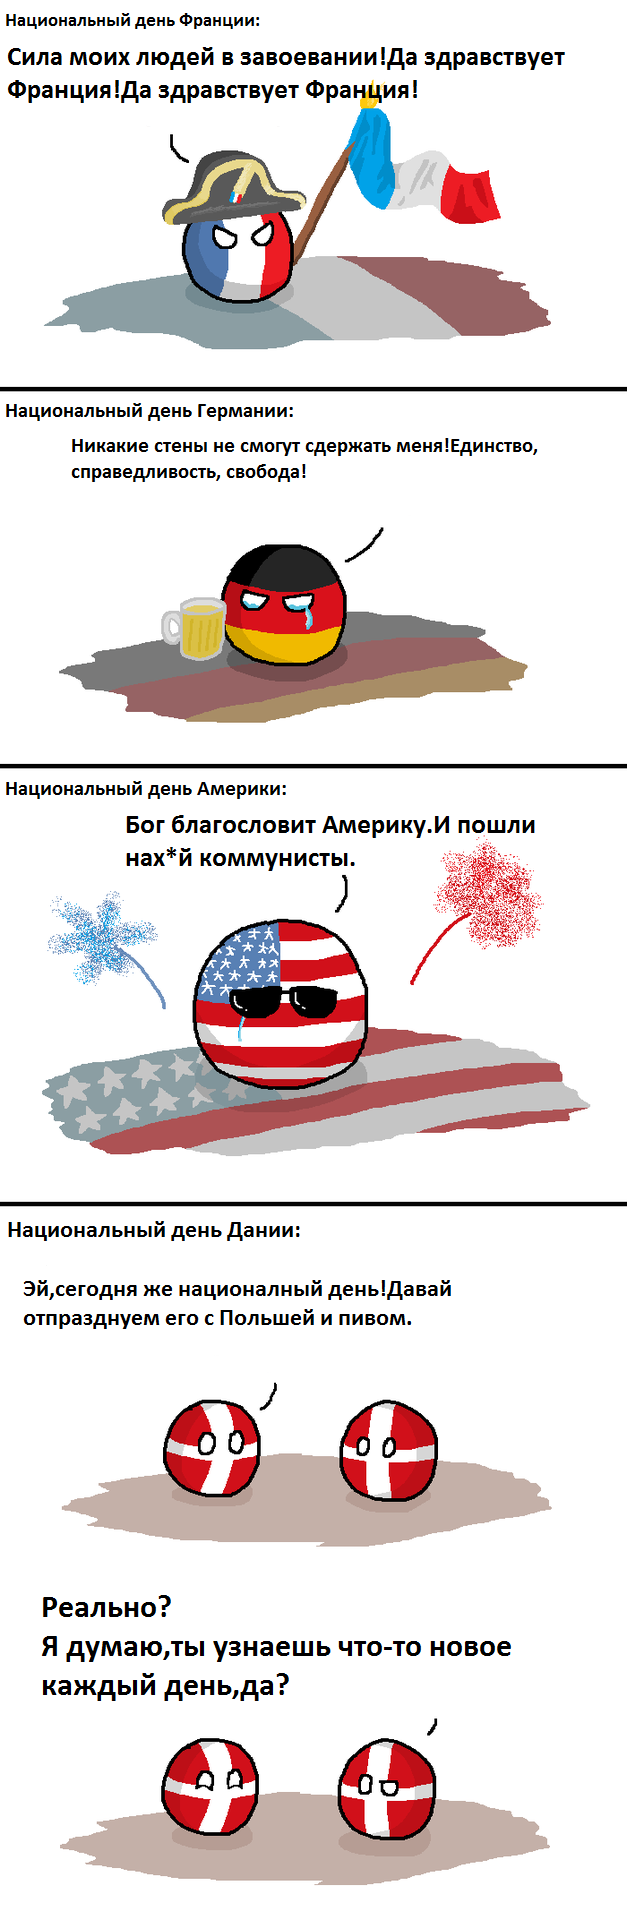 National days of different countries - Countryballs, USA, Longpost, Germany, Denmark, France, Comics